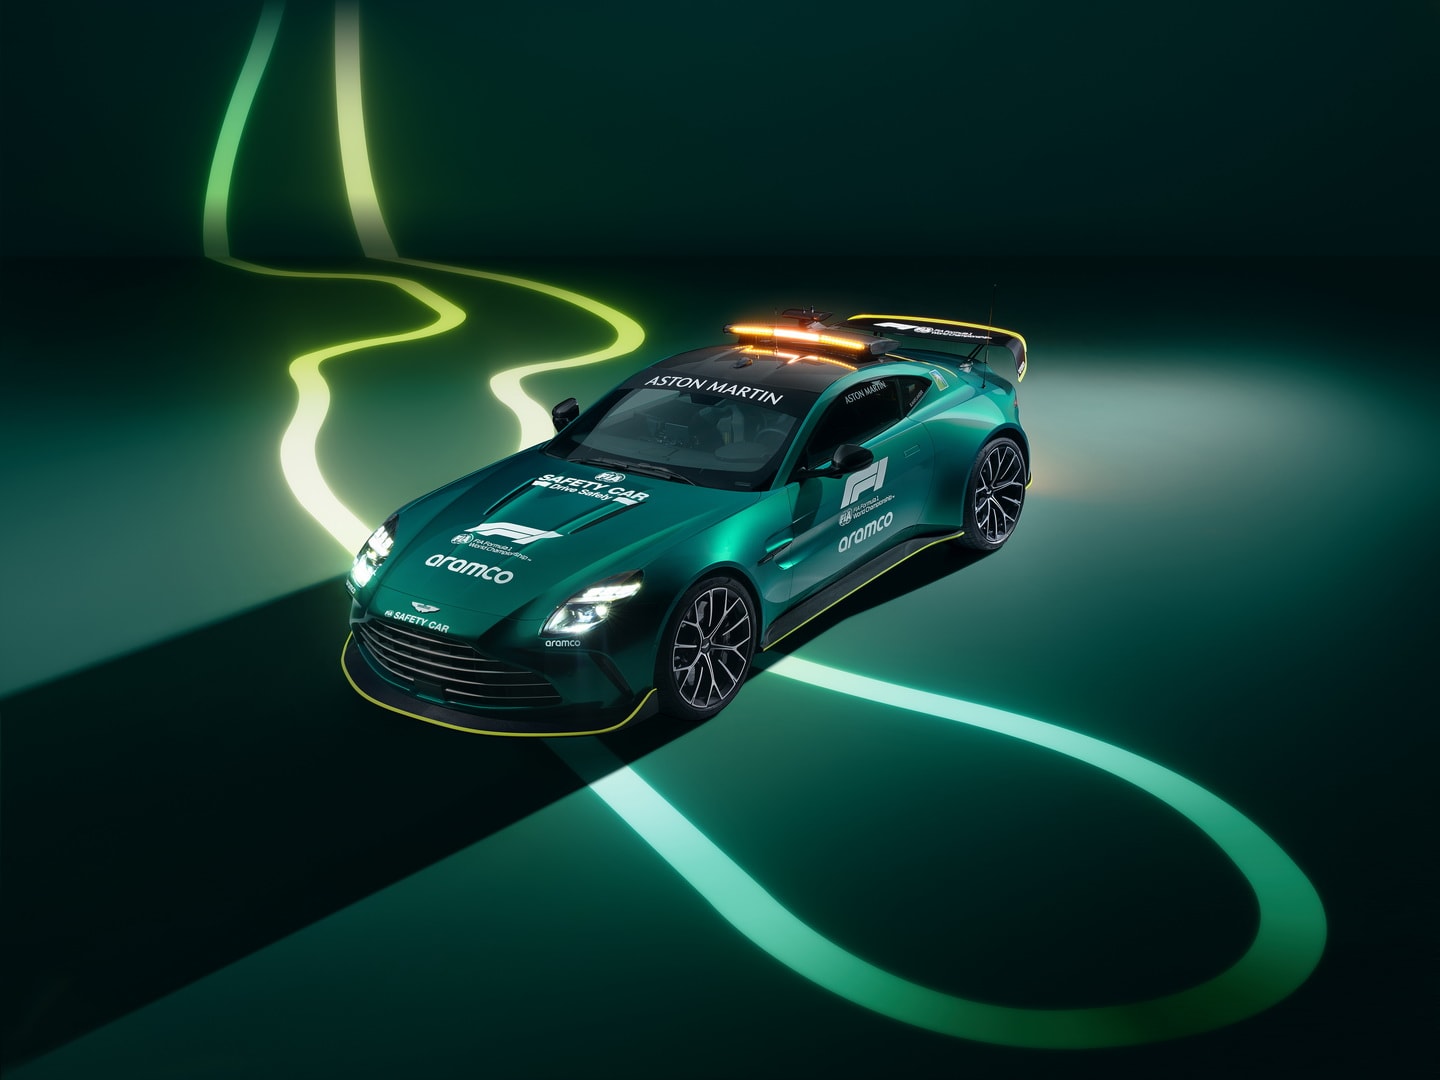 All New Vantage F1 Safety Car Is The Only Aston Martin That Can Keep Max Verstappen Behind 1